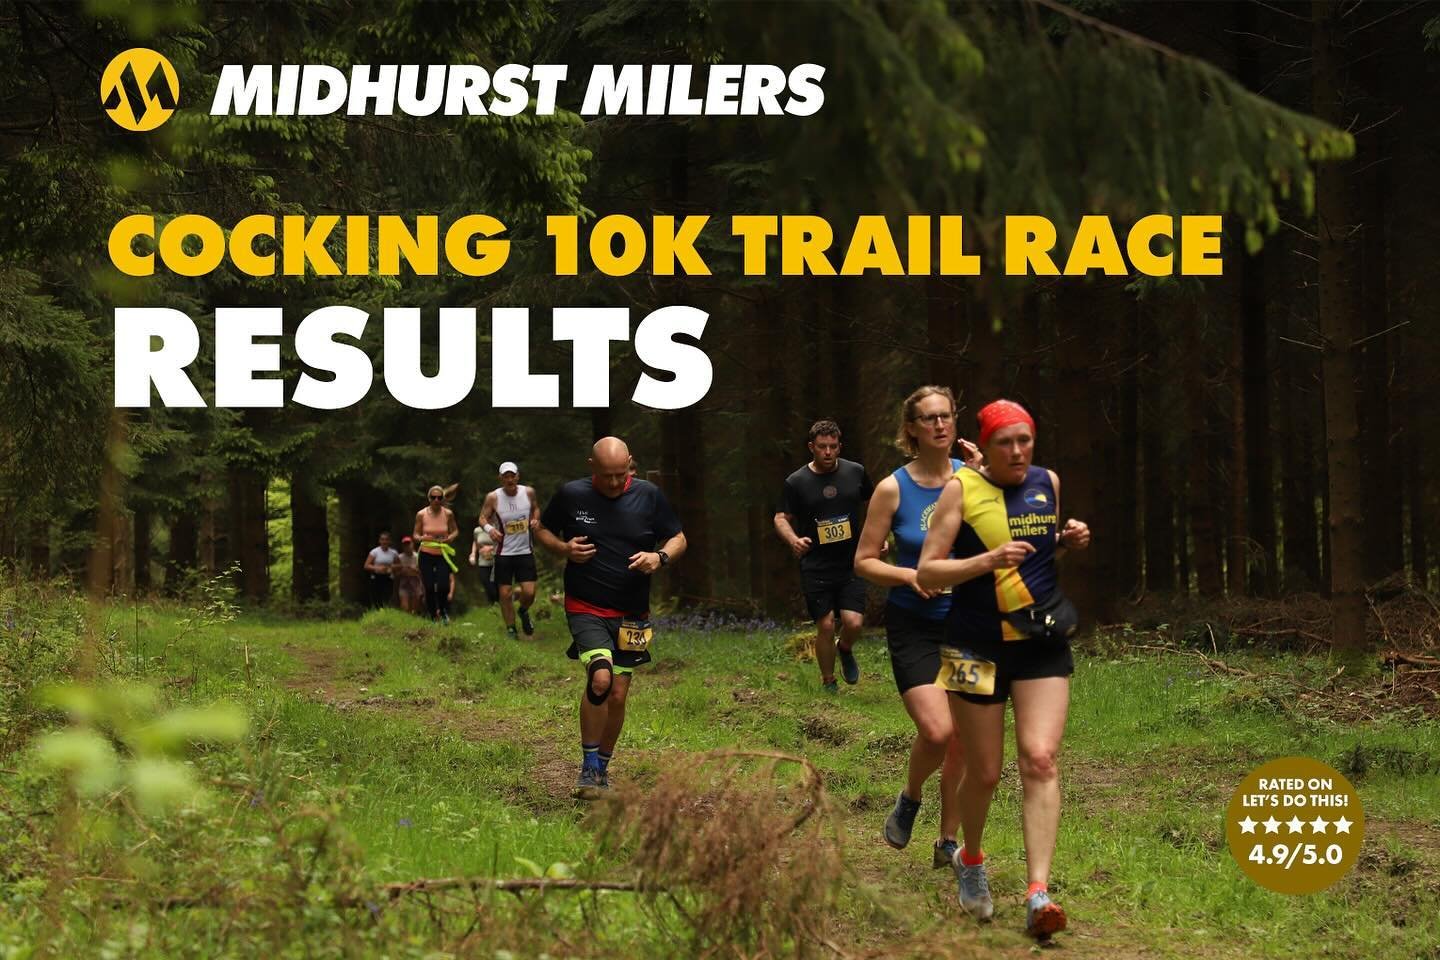 The Cocking 10k results are online, head over to our website for details #cocking10k #midhurstmilers